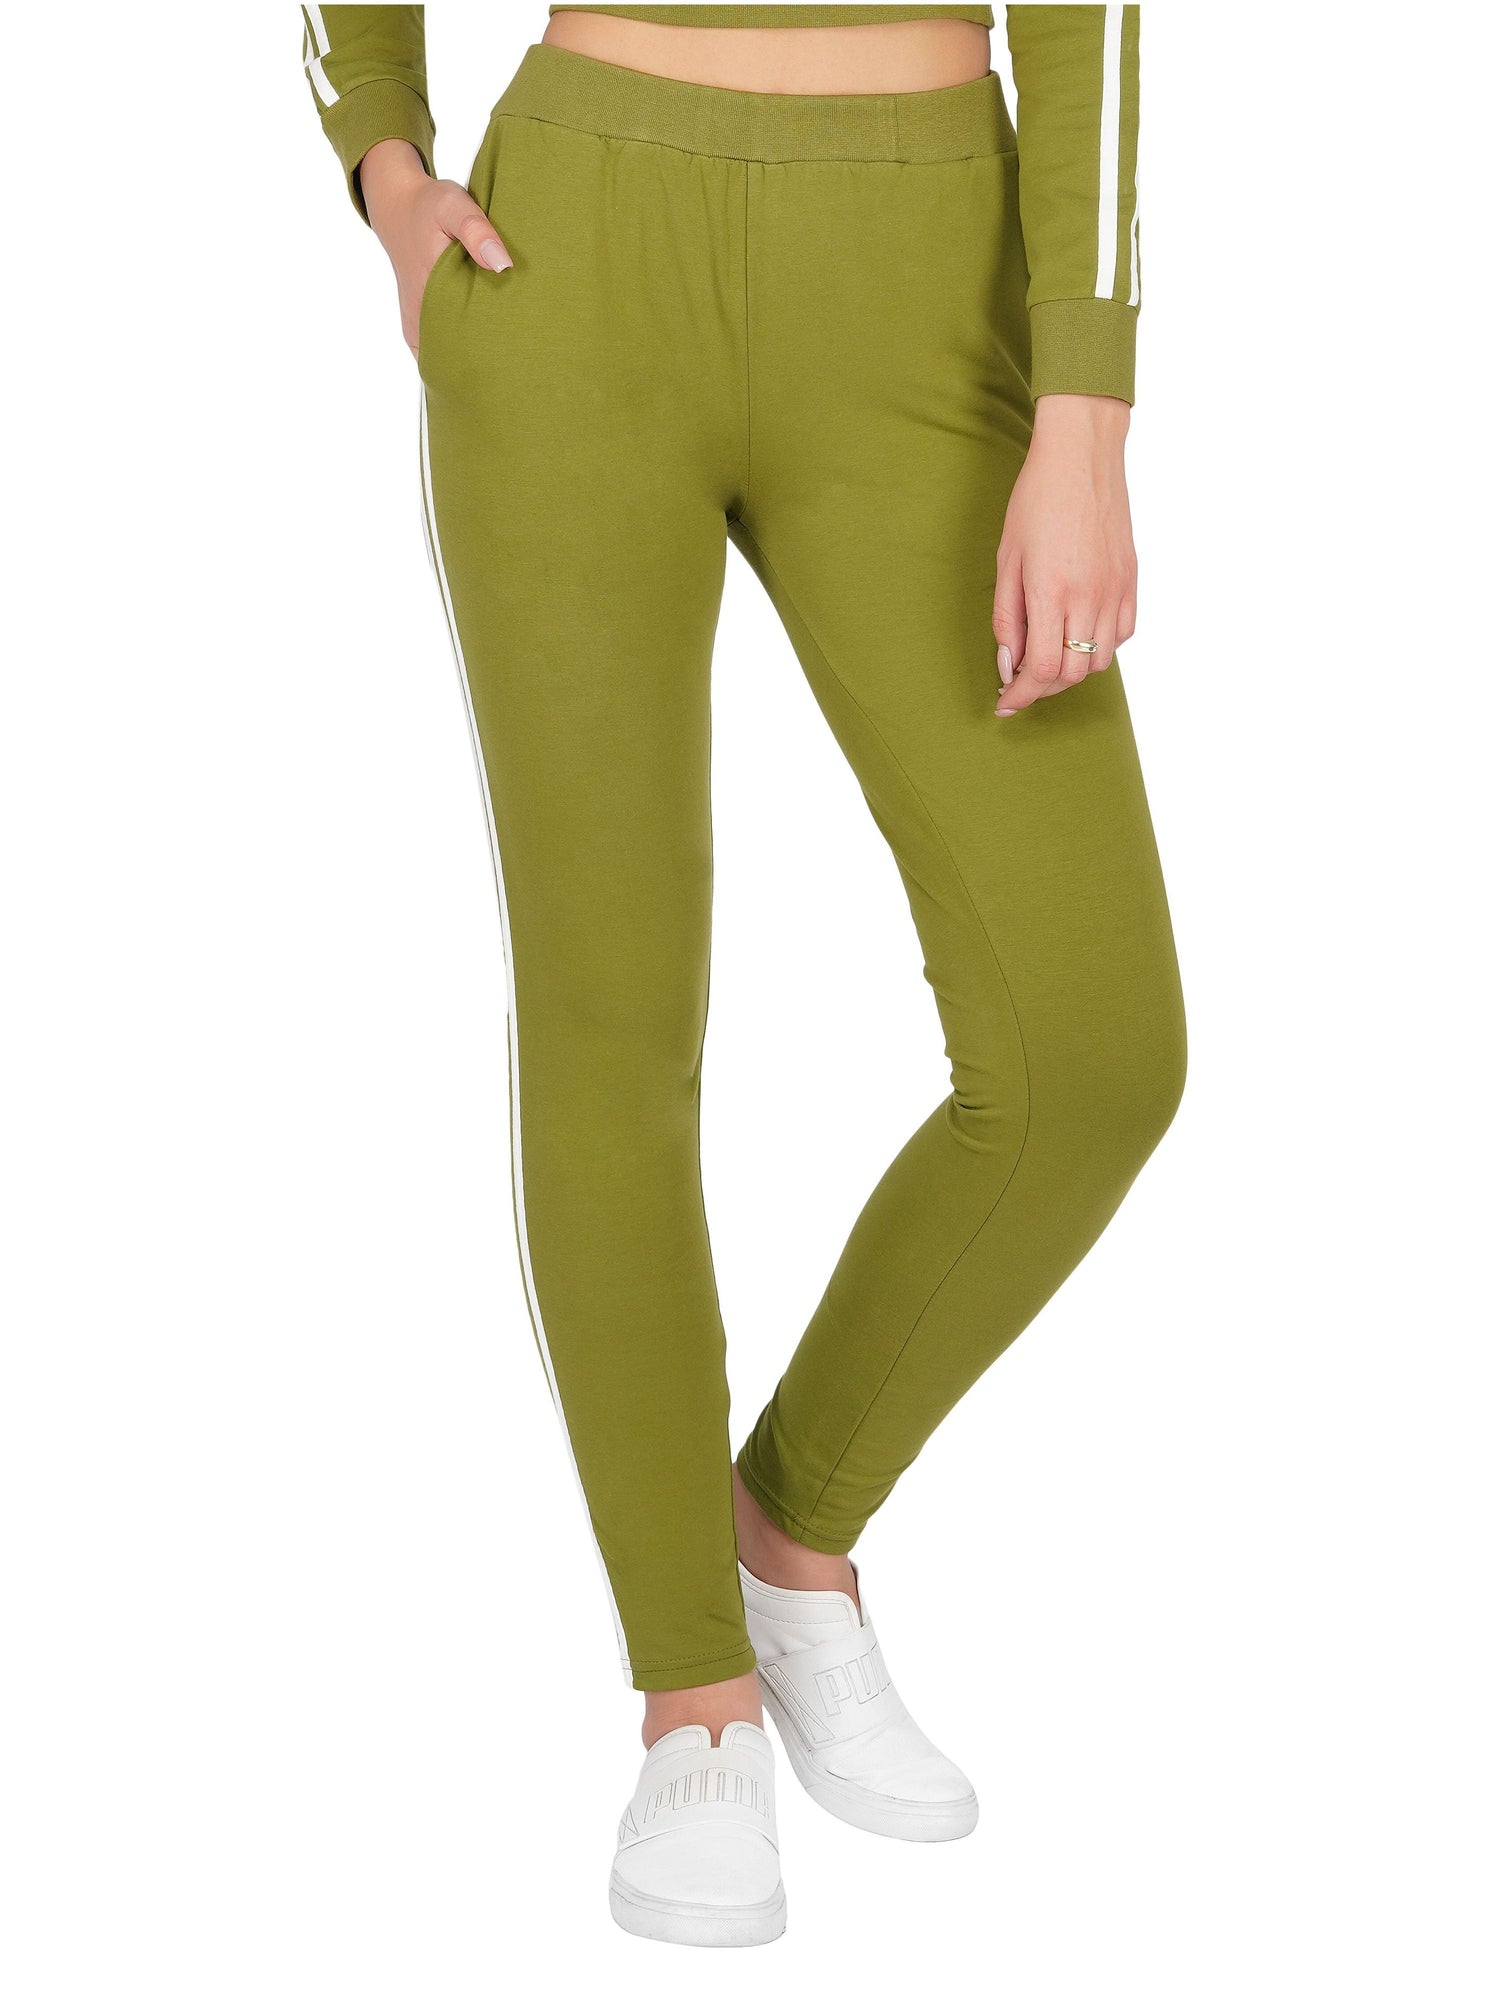 SLAY. Women's Olive Green Jogger Pants With White Stripes-clothing-to-slay.myshopify.com-Joggers